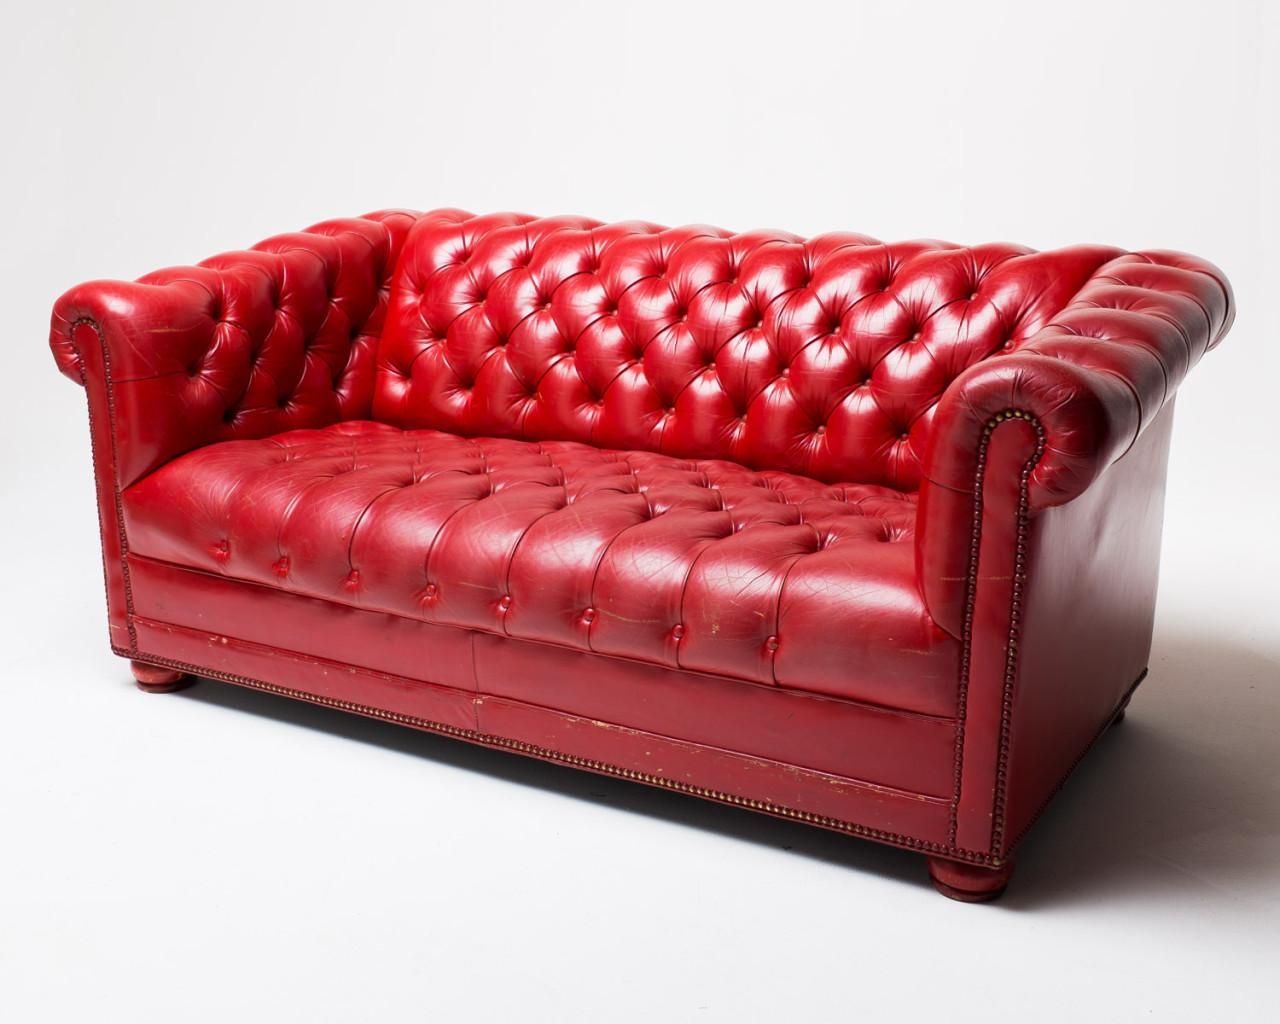 Co002 Red Leather Sofa | Acme Studio Intended For Dark Red Leather Sofas (View 5 of 20)